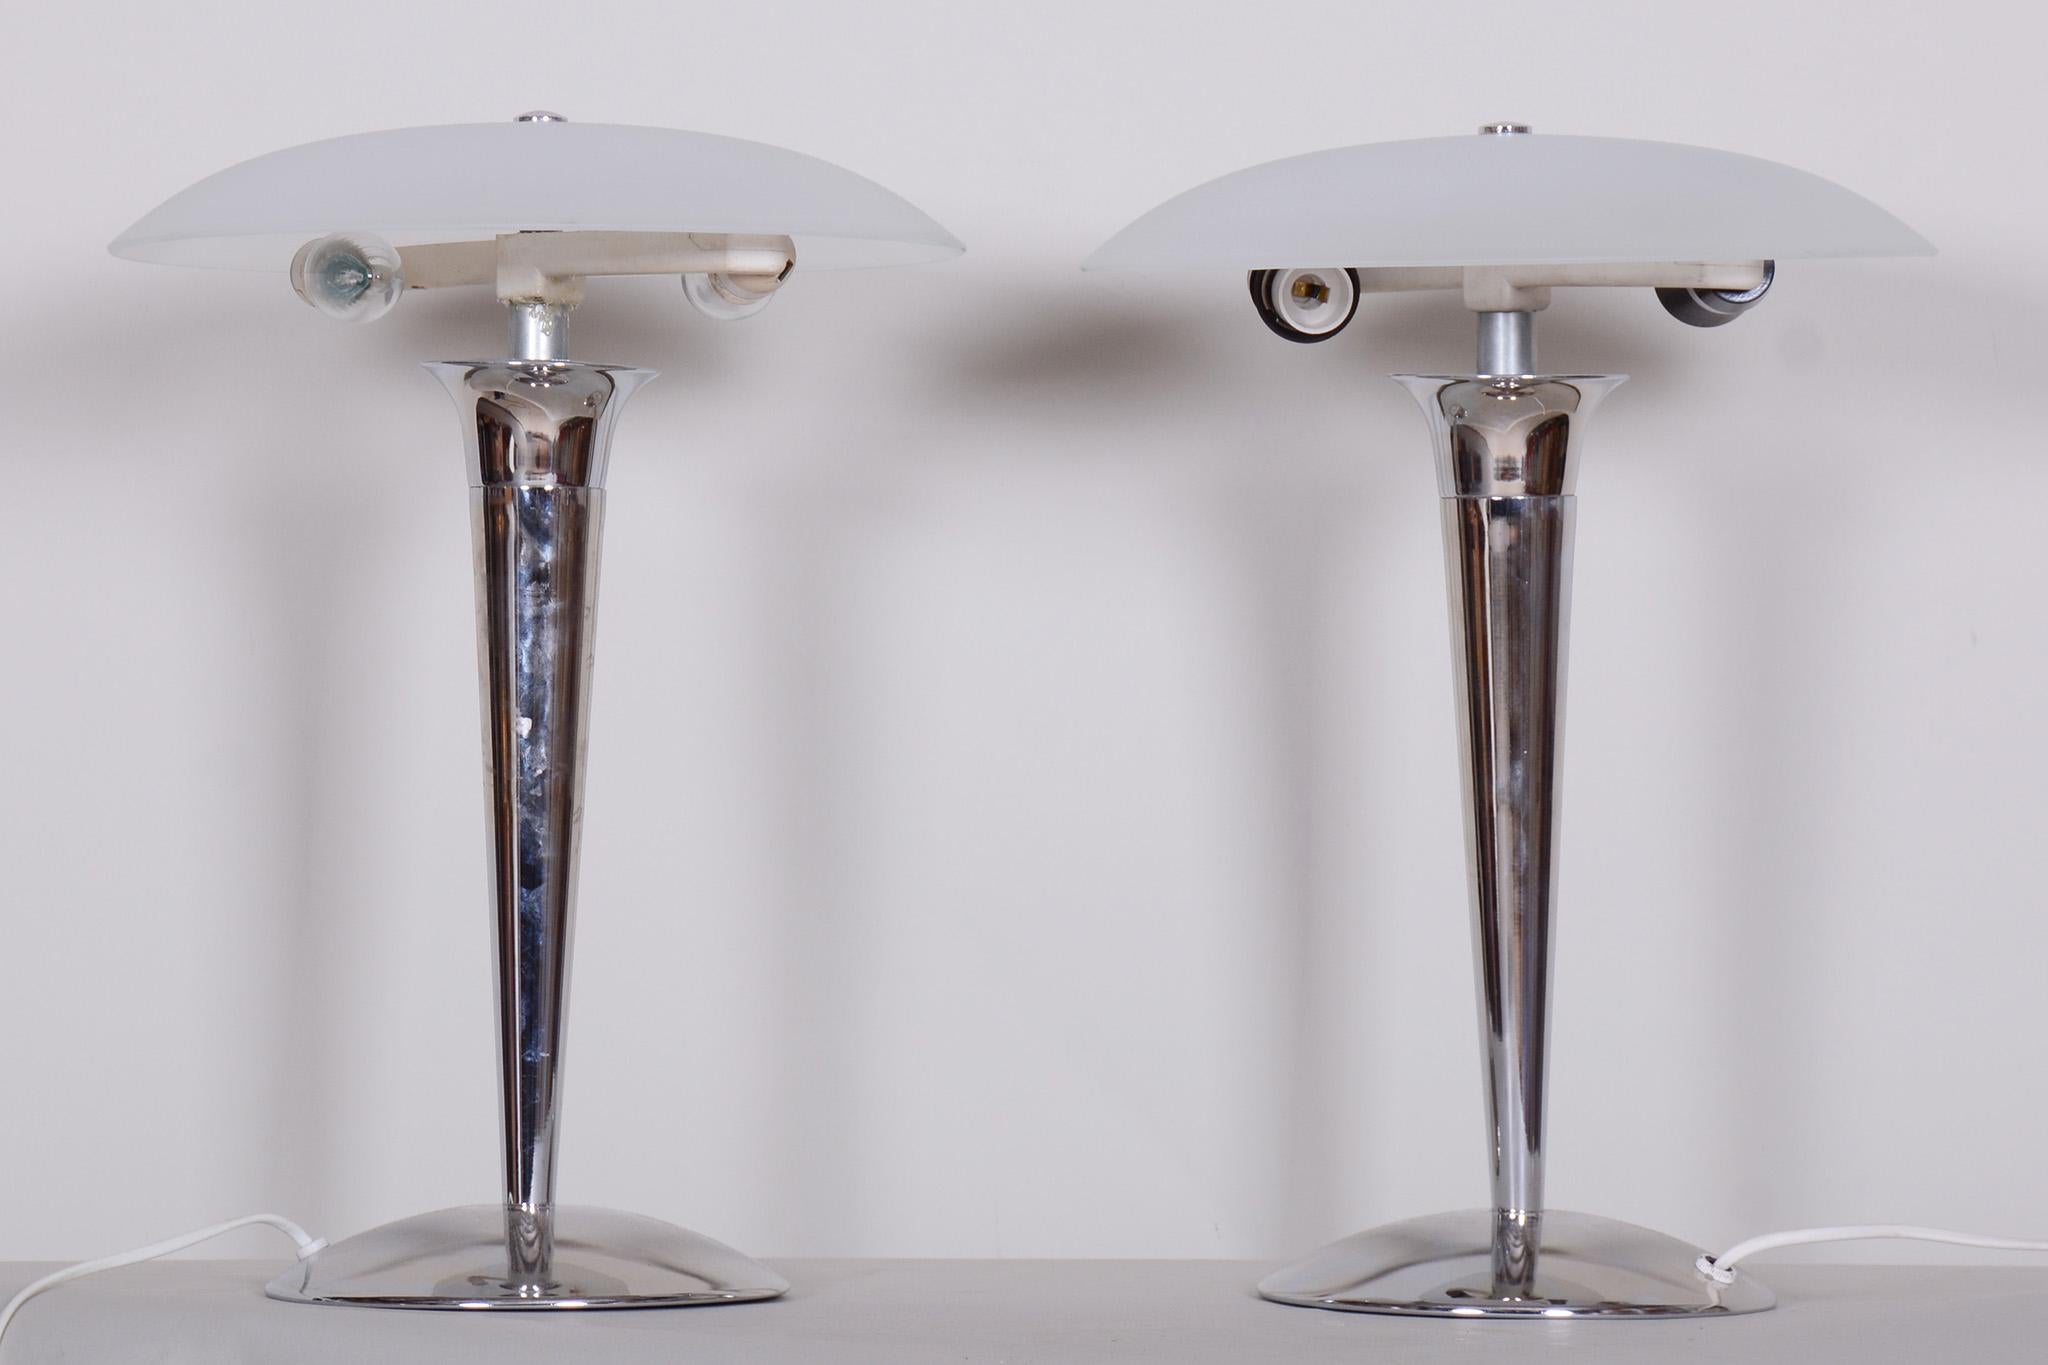 Pair of Midcentury Table Lamps, Chrome-Plated Steel, Milk Glass, Germany, 1950s For Sale 2